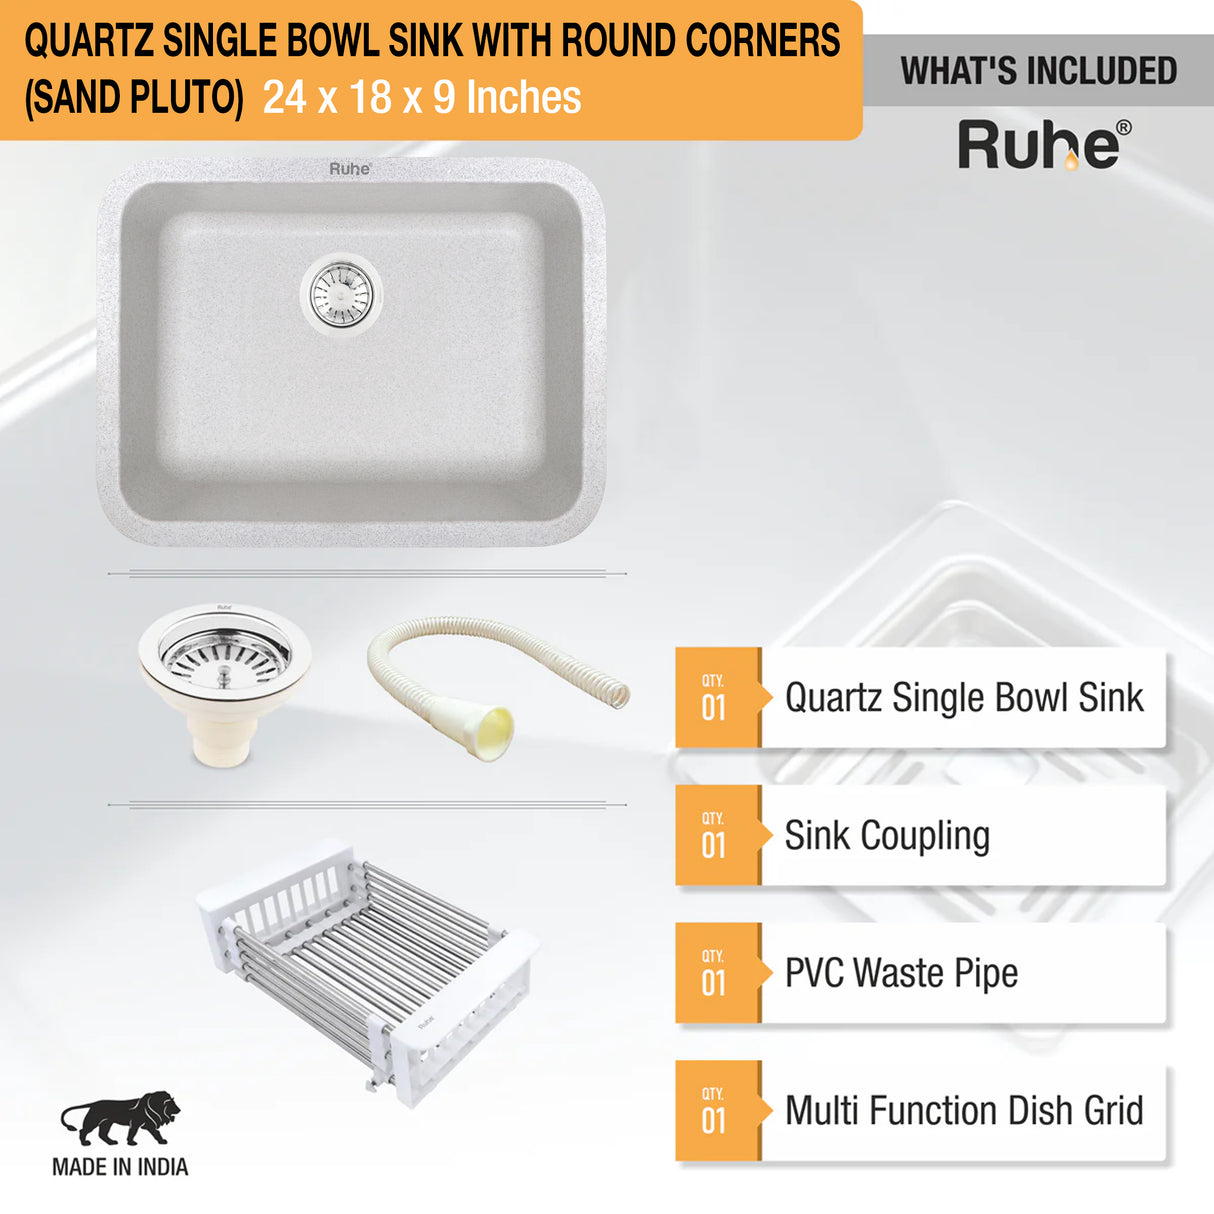 Quartz Single Bowl Kitchen Sink with Rounded Corners - Sand Pluto (24 x 18 x 9)  - by Ruhe®